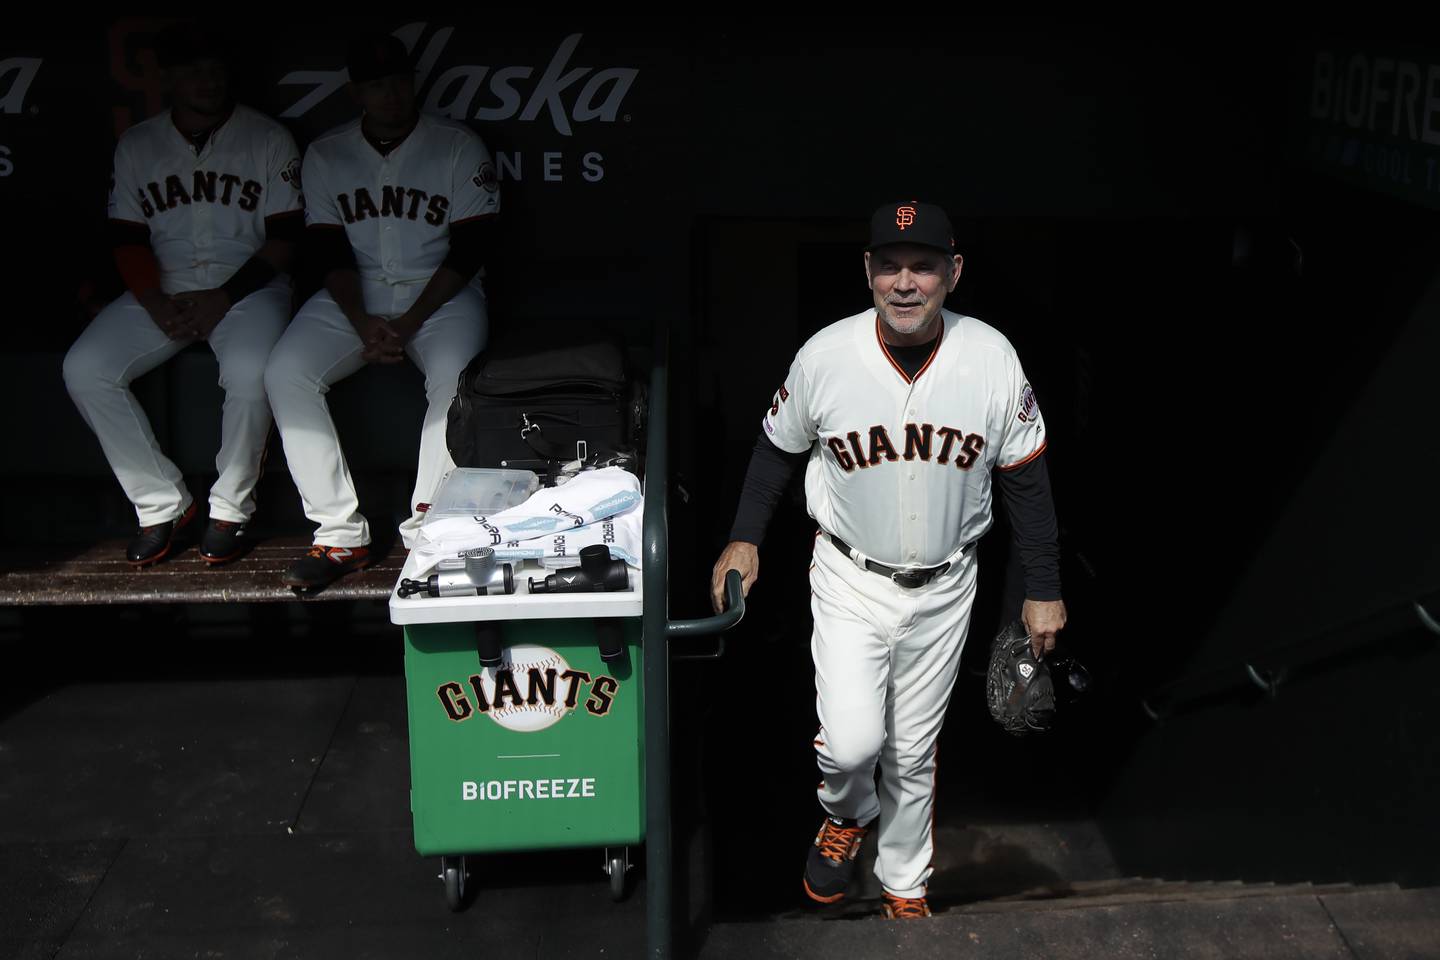 Giants manager Bruce Bochy walks into the dugout before a game against the Dodgers in San Francisco on Sept. 29, 2019.